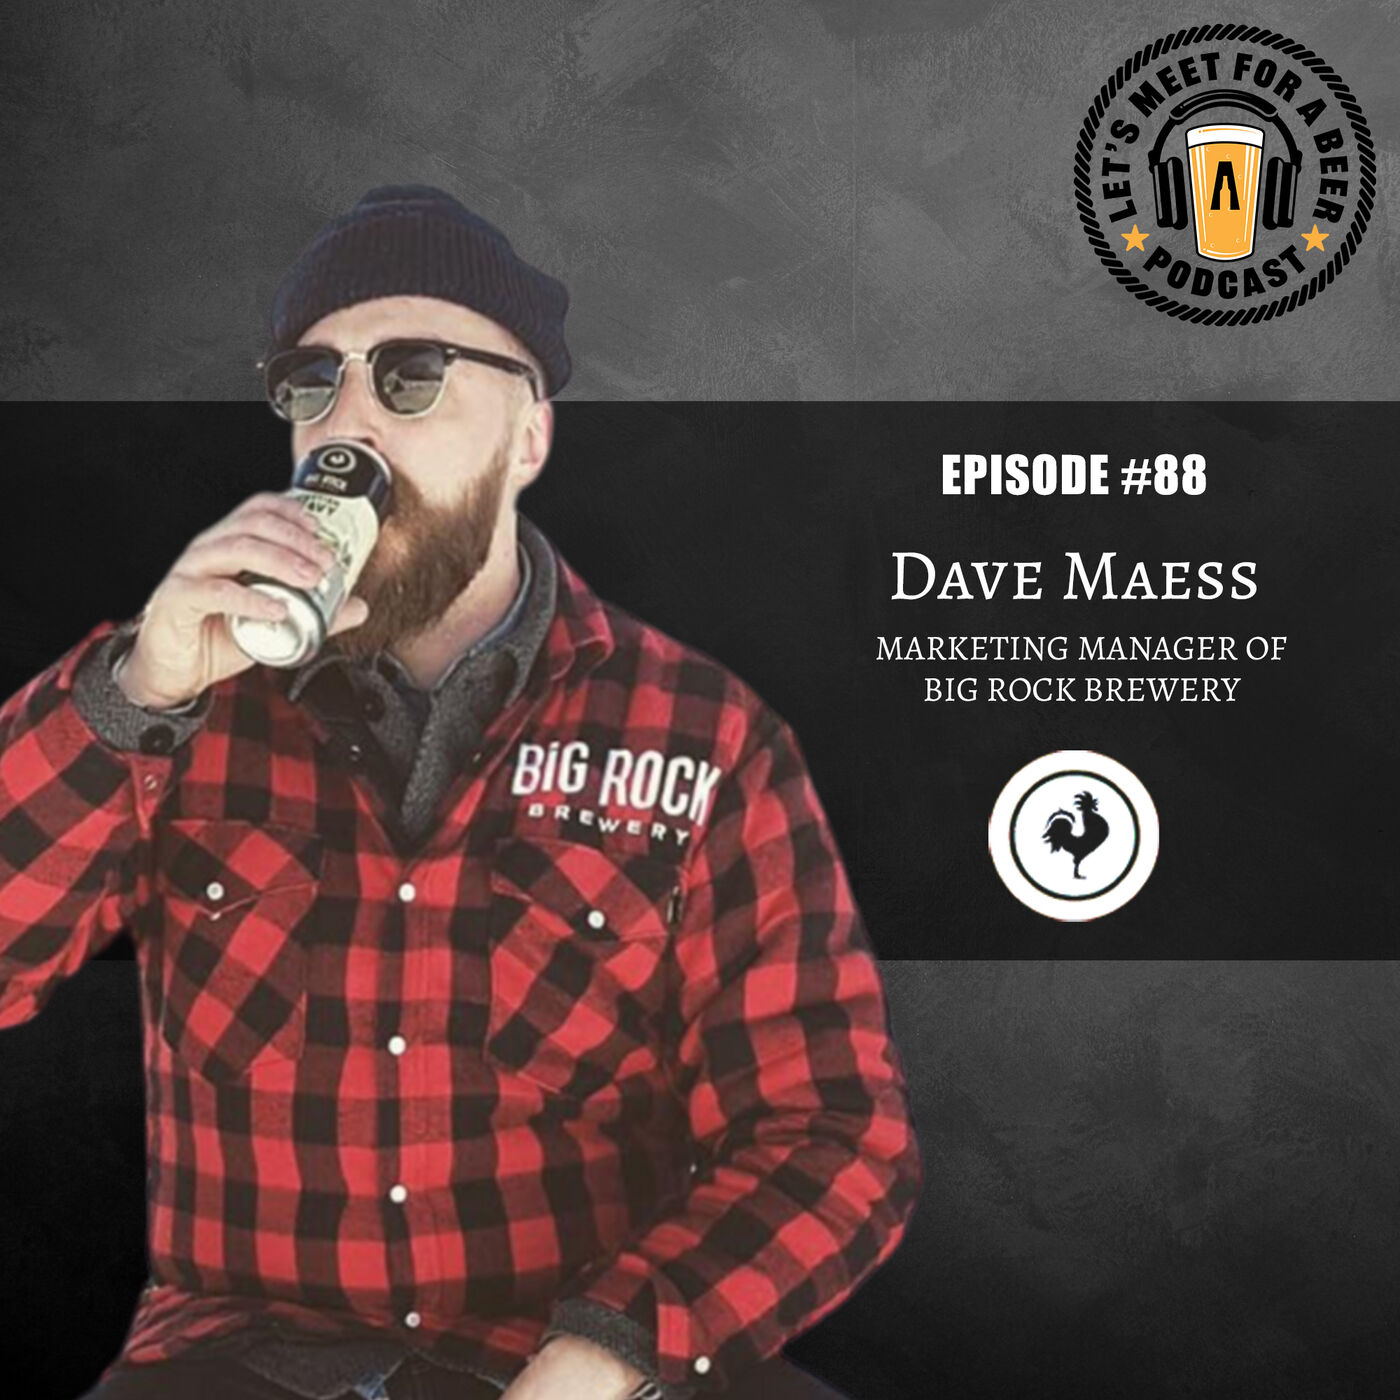 Episode #88 – Dave Maess, Marketing Manager of Big Rock Brewery